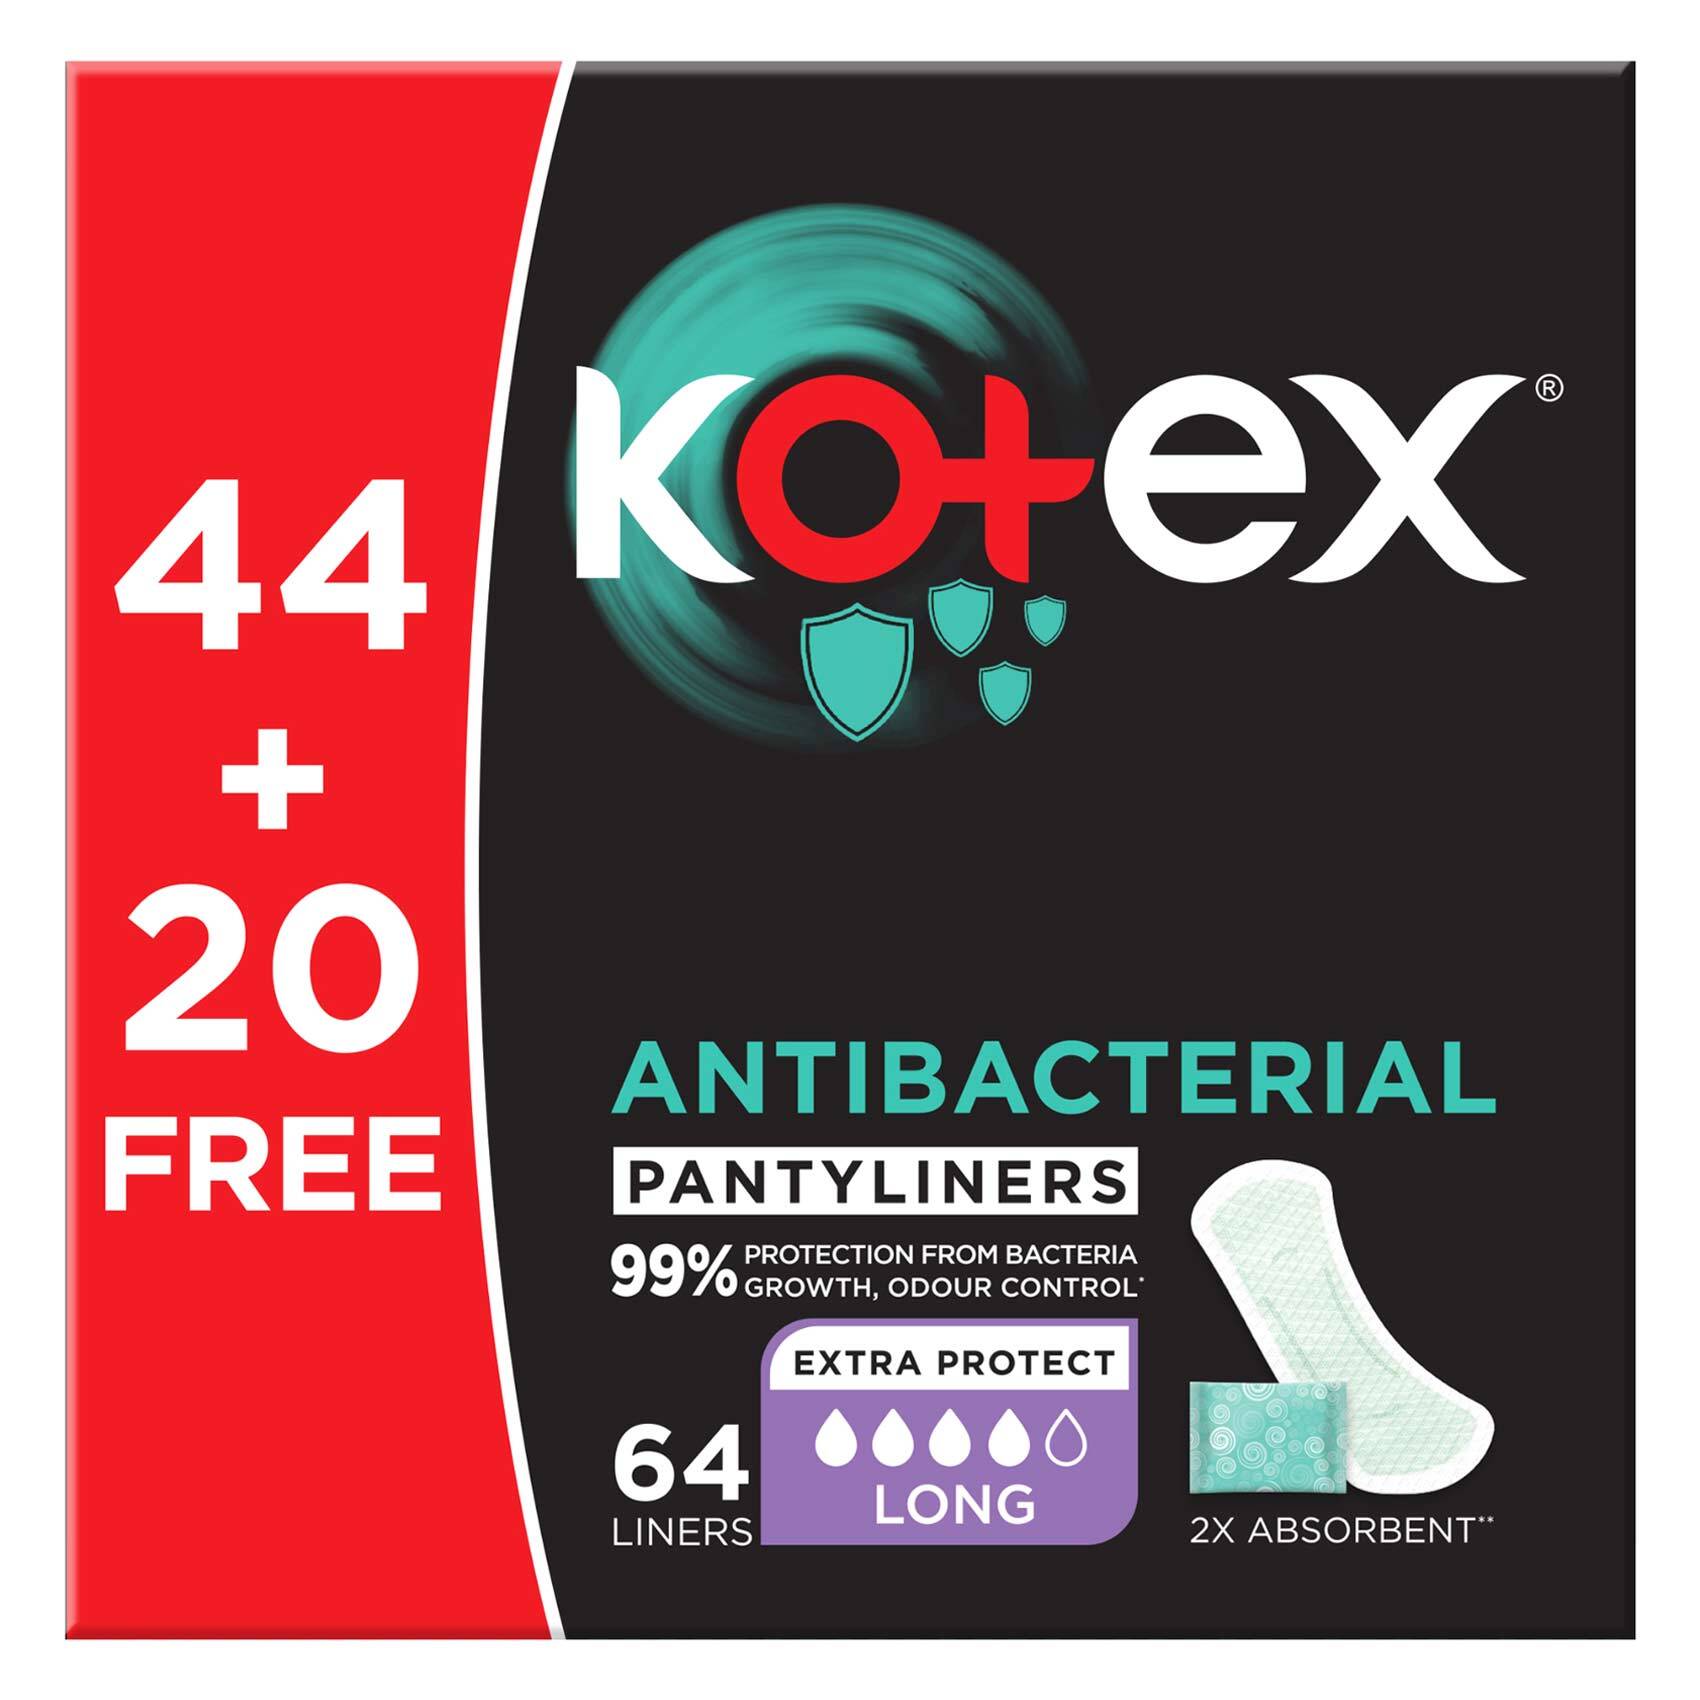 Buy Kotex Antibacterial Panty Liners, 99% Protection from Bacteria